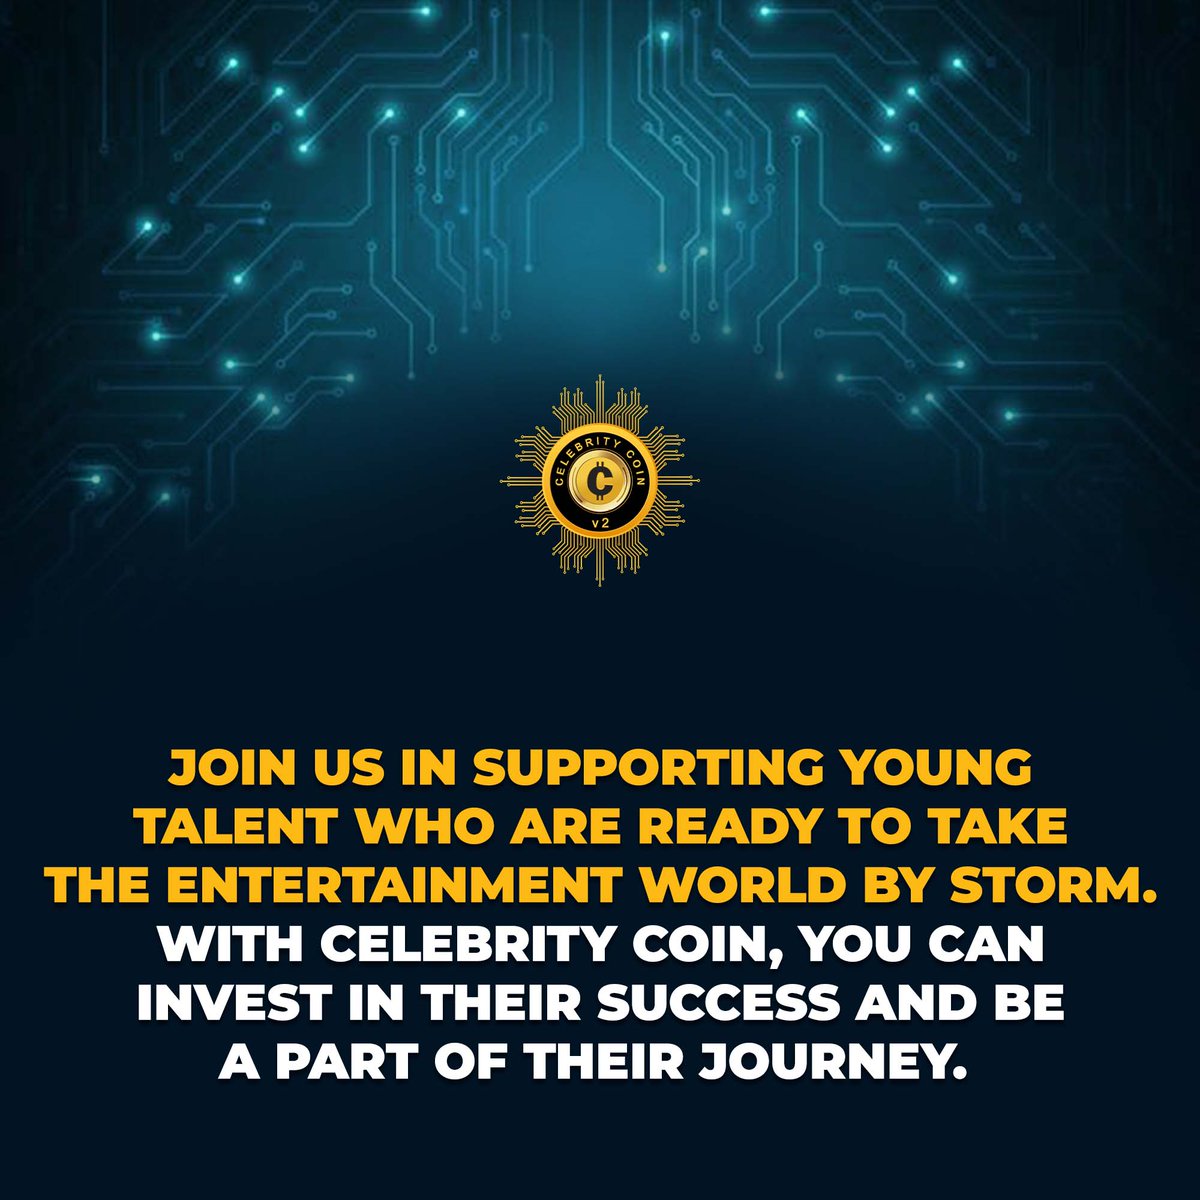 𝗝𝗼𝗶𝗻 𝘂𝘀 in supporting young
talent who are ready to take
the #entertainment world by #storm.
With 𝐂𝐞𝐥𝐞𝐛𝐫𝐢𝐭𝐲 𝐂𝐨𝐢𝐧, you can
invest in their success and be
a part of their 𝗷𝗼𝘂𝗿𝗻𝗲𝘆.

#STUDIONATION2 #celebritycoin #investing #cryptocurrency #talenthasnoclour